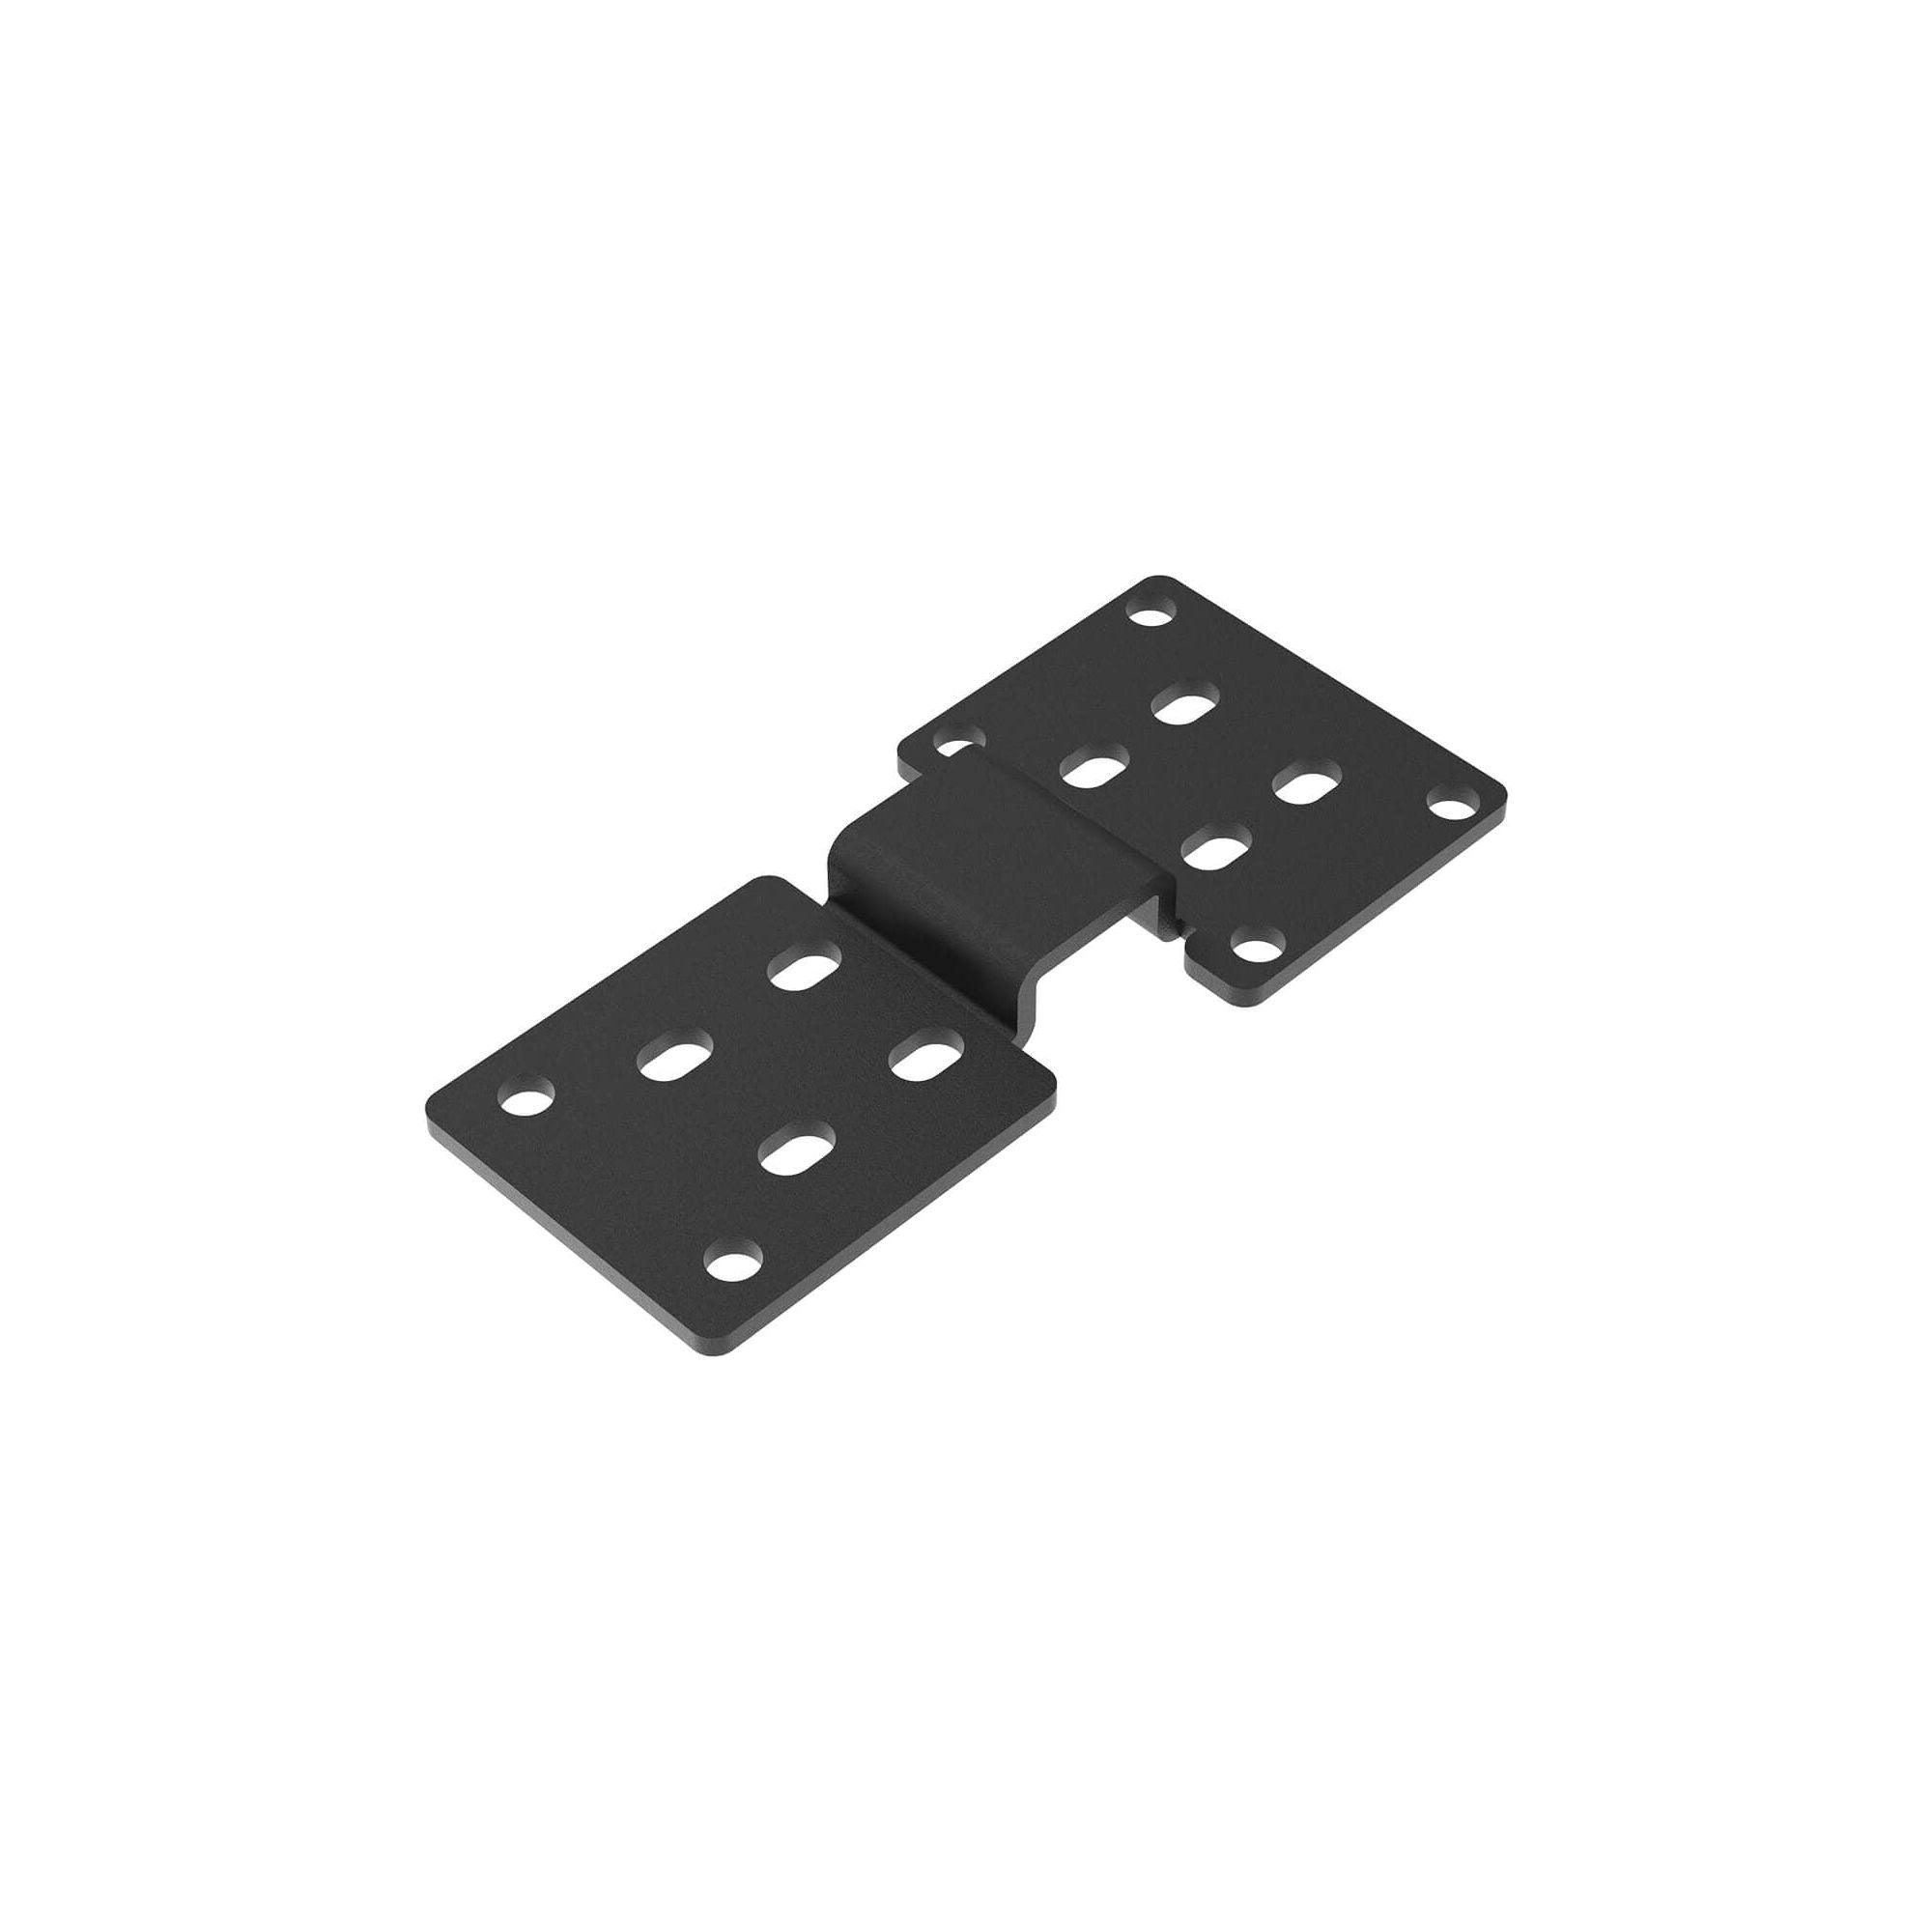 DALS - L 90 connector for the MSLPD48 pendant - Lights Canada